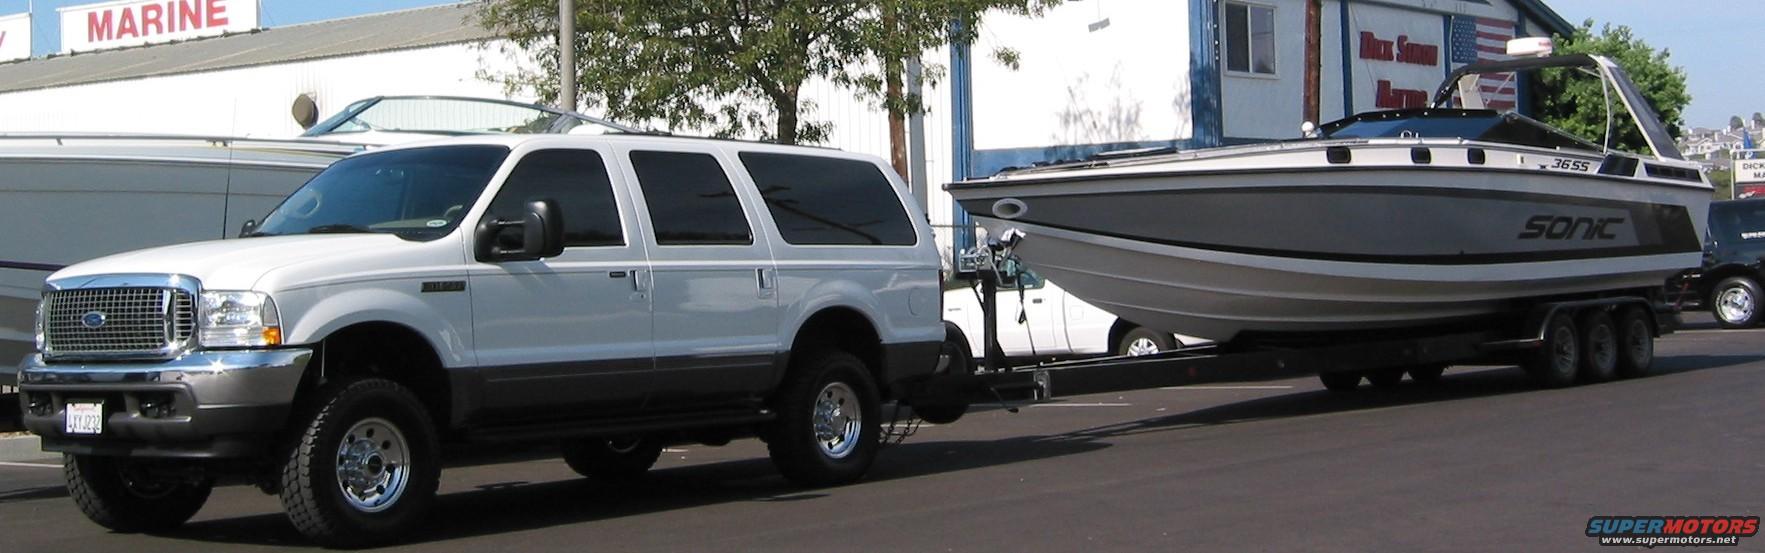 Towing capacity ford excursion 7.3 diesel